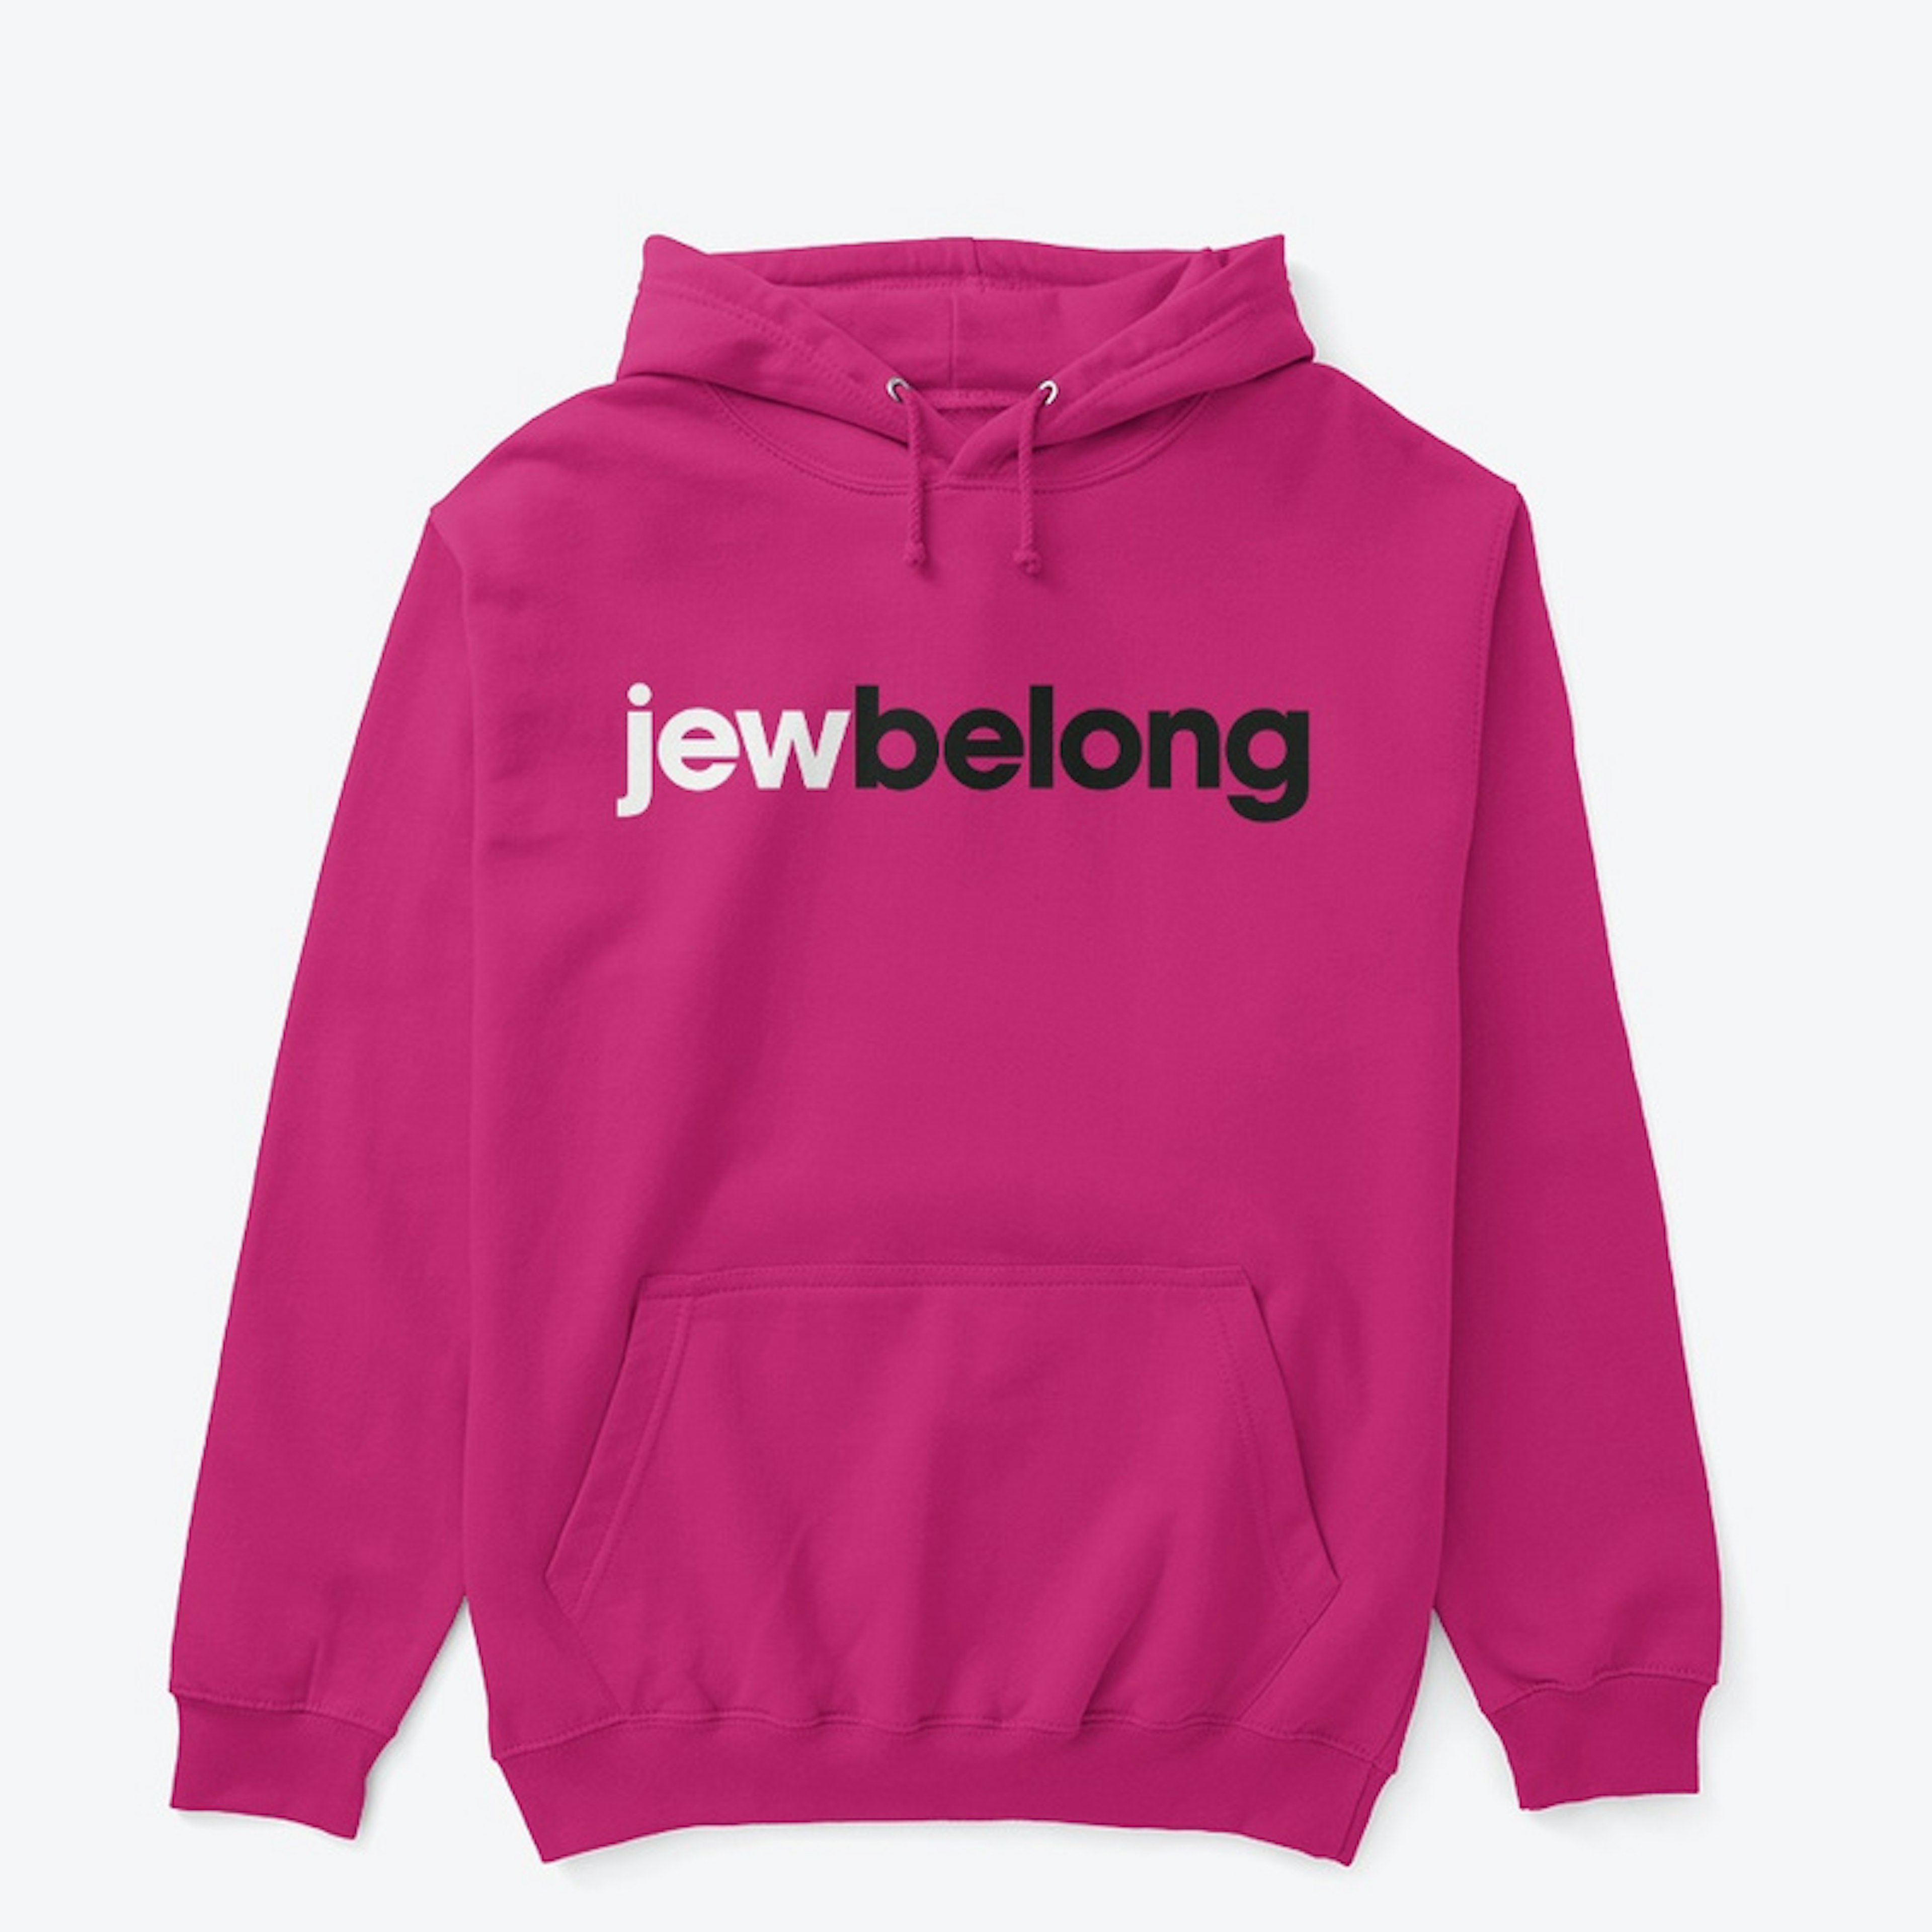 Hoodie with slogan on back